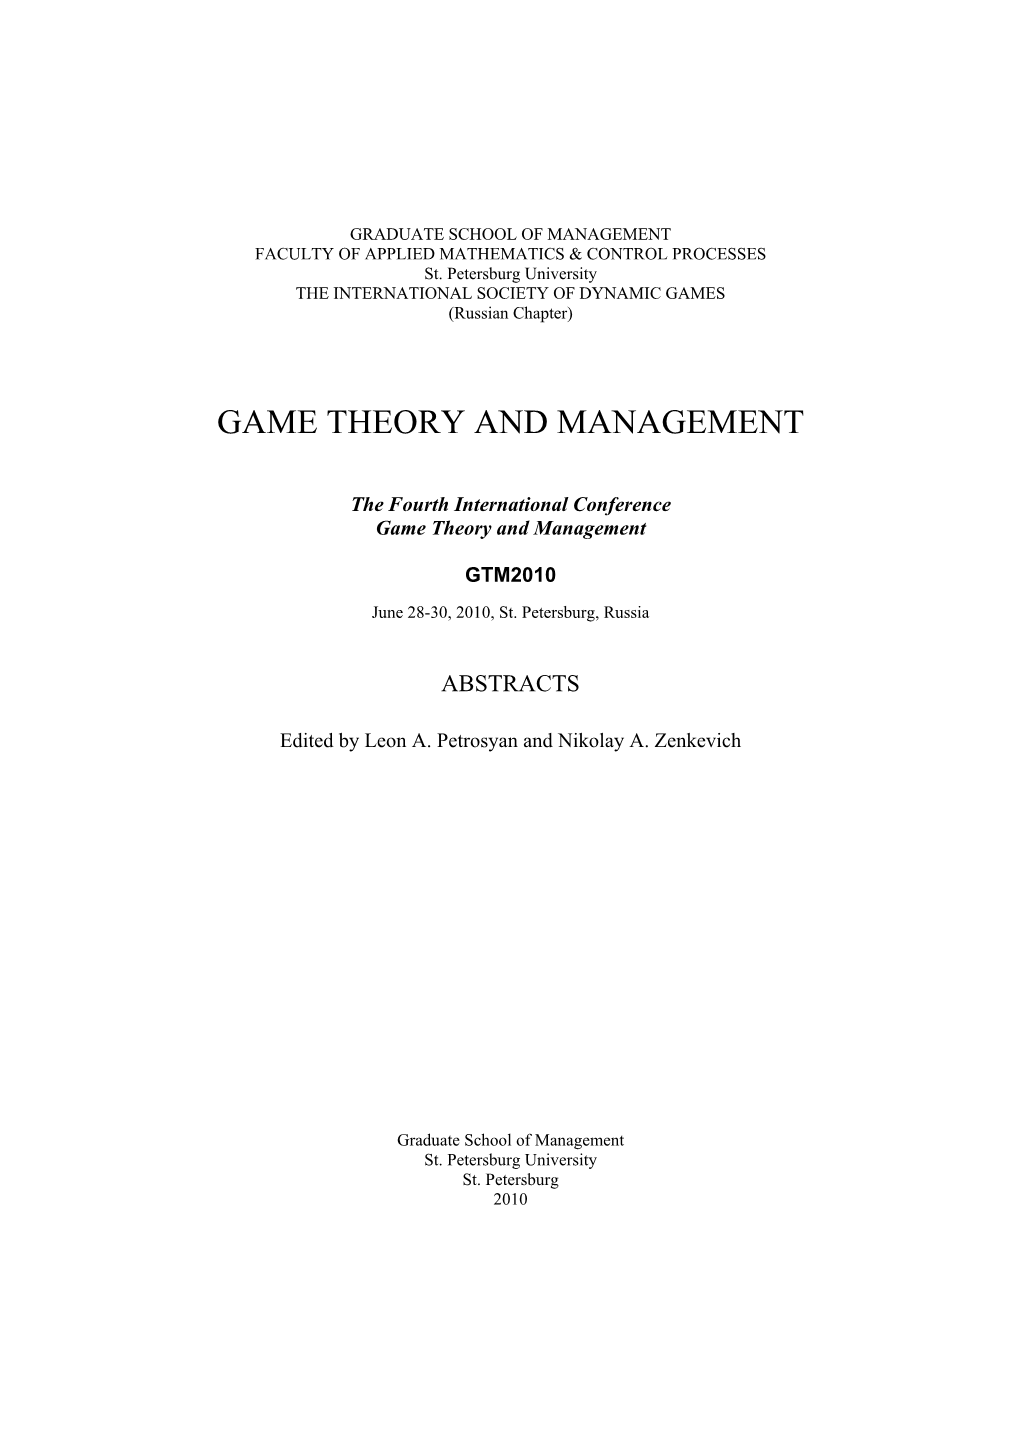 Game Theory and Management